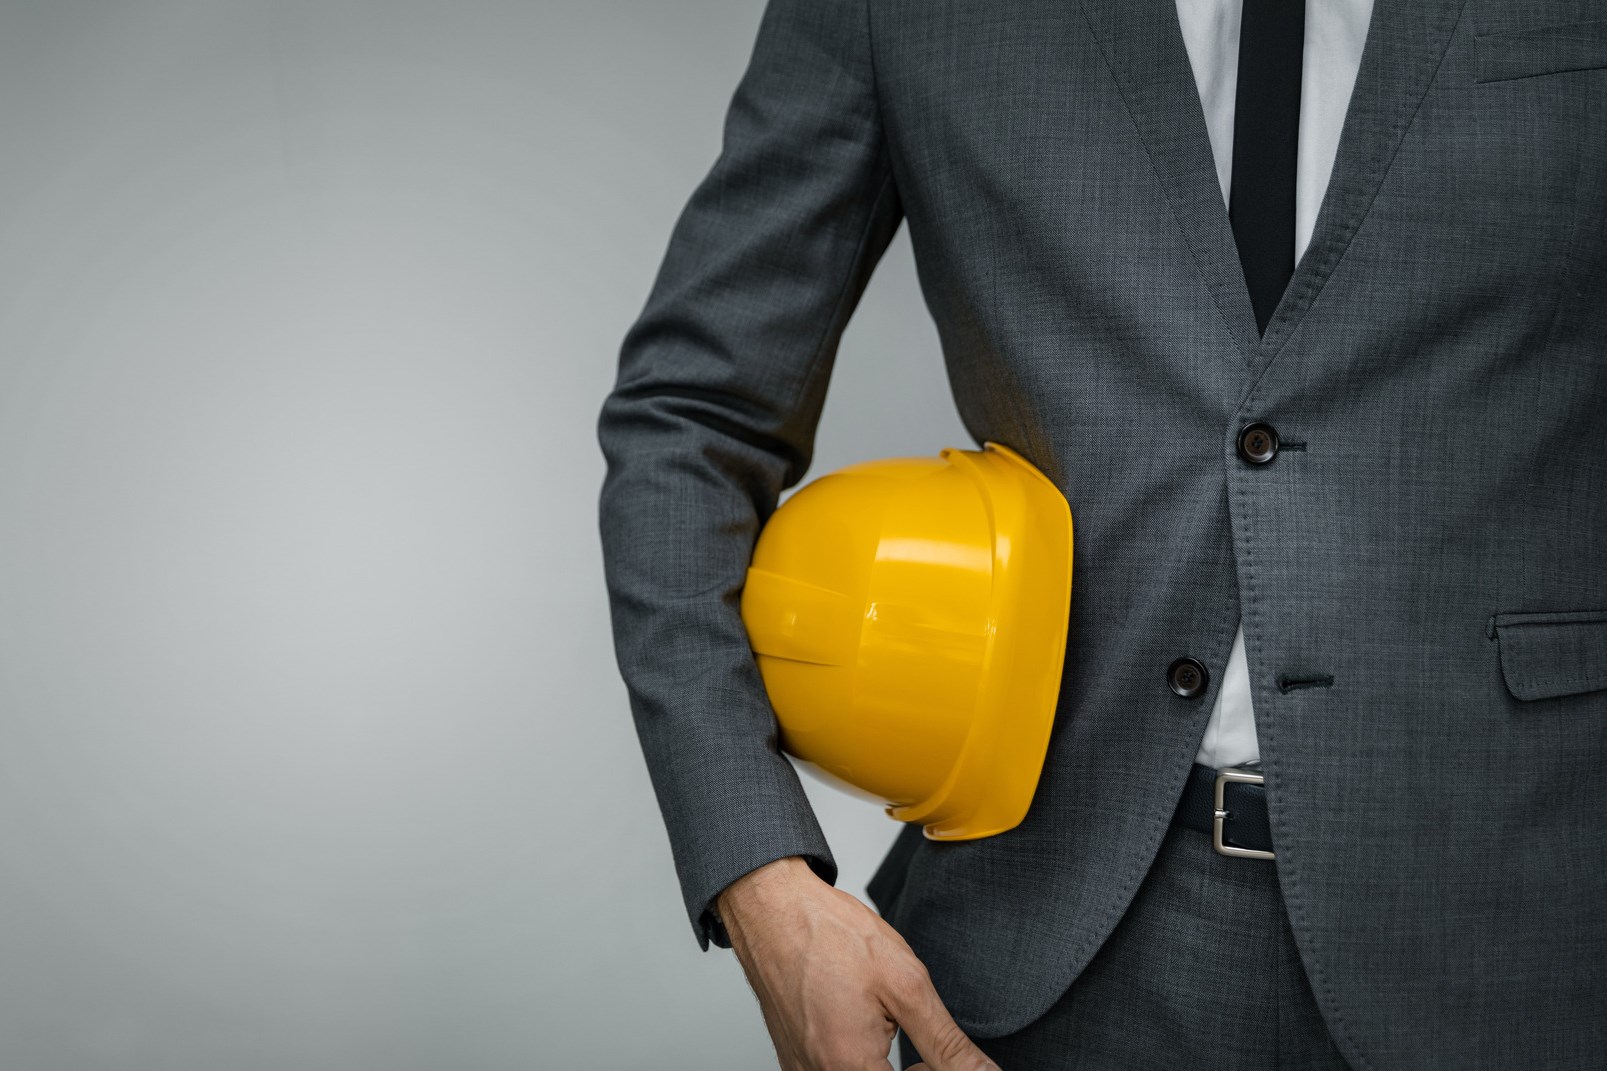 Construction industry business - businessman holding yellow hard hat underarm on gray background with copy space